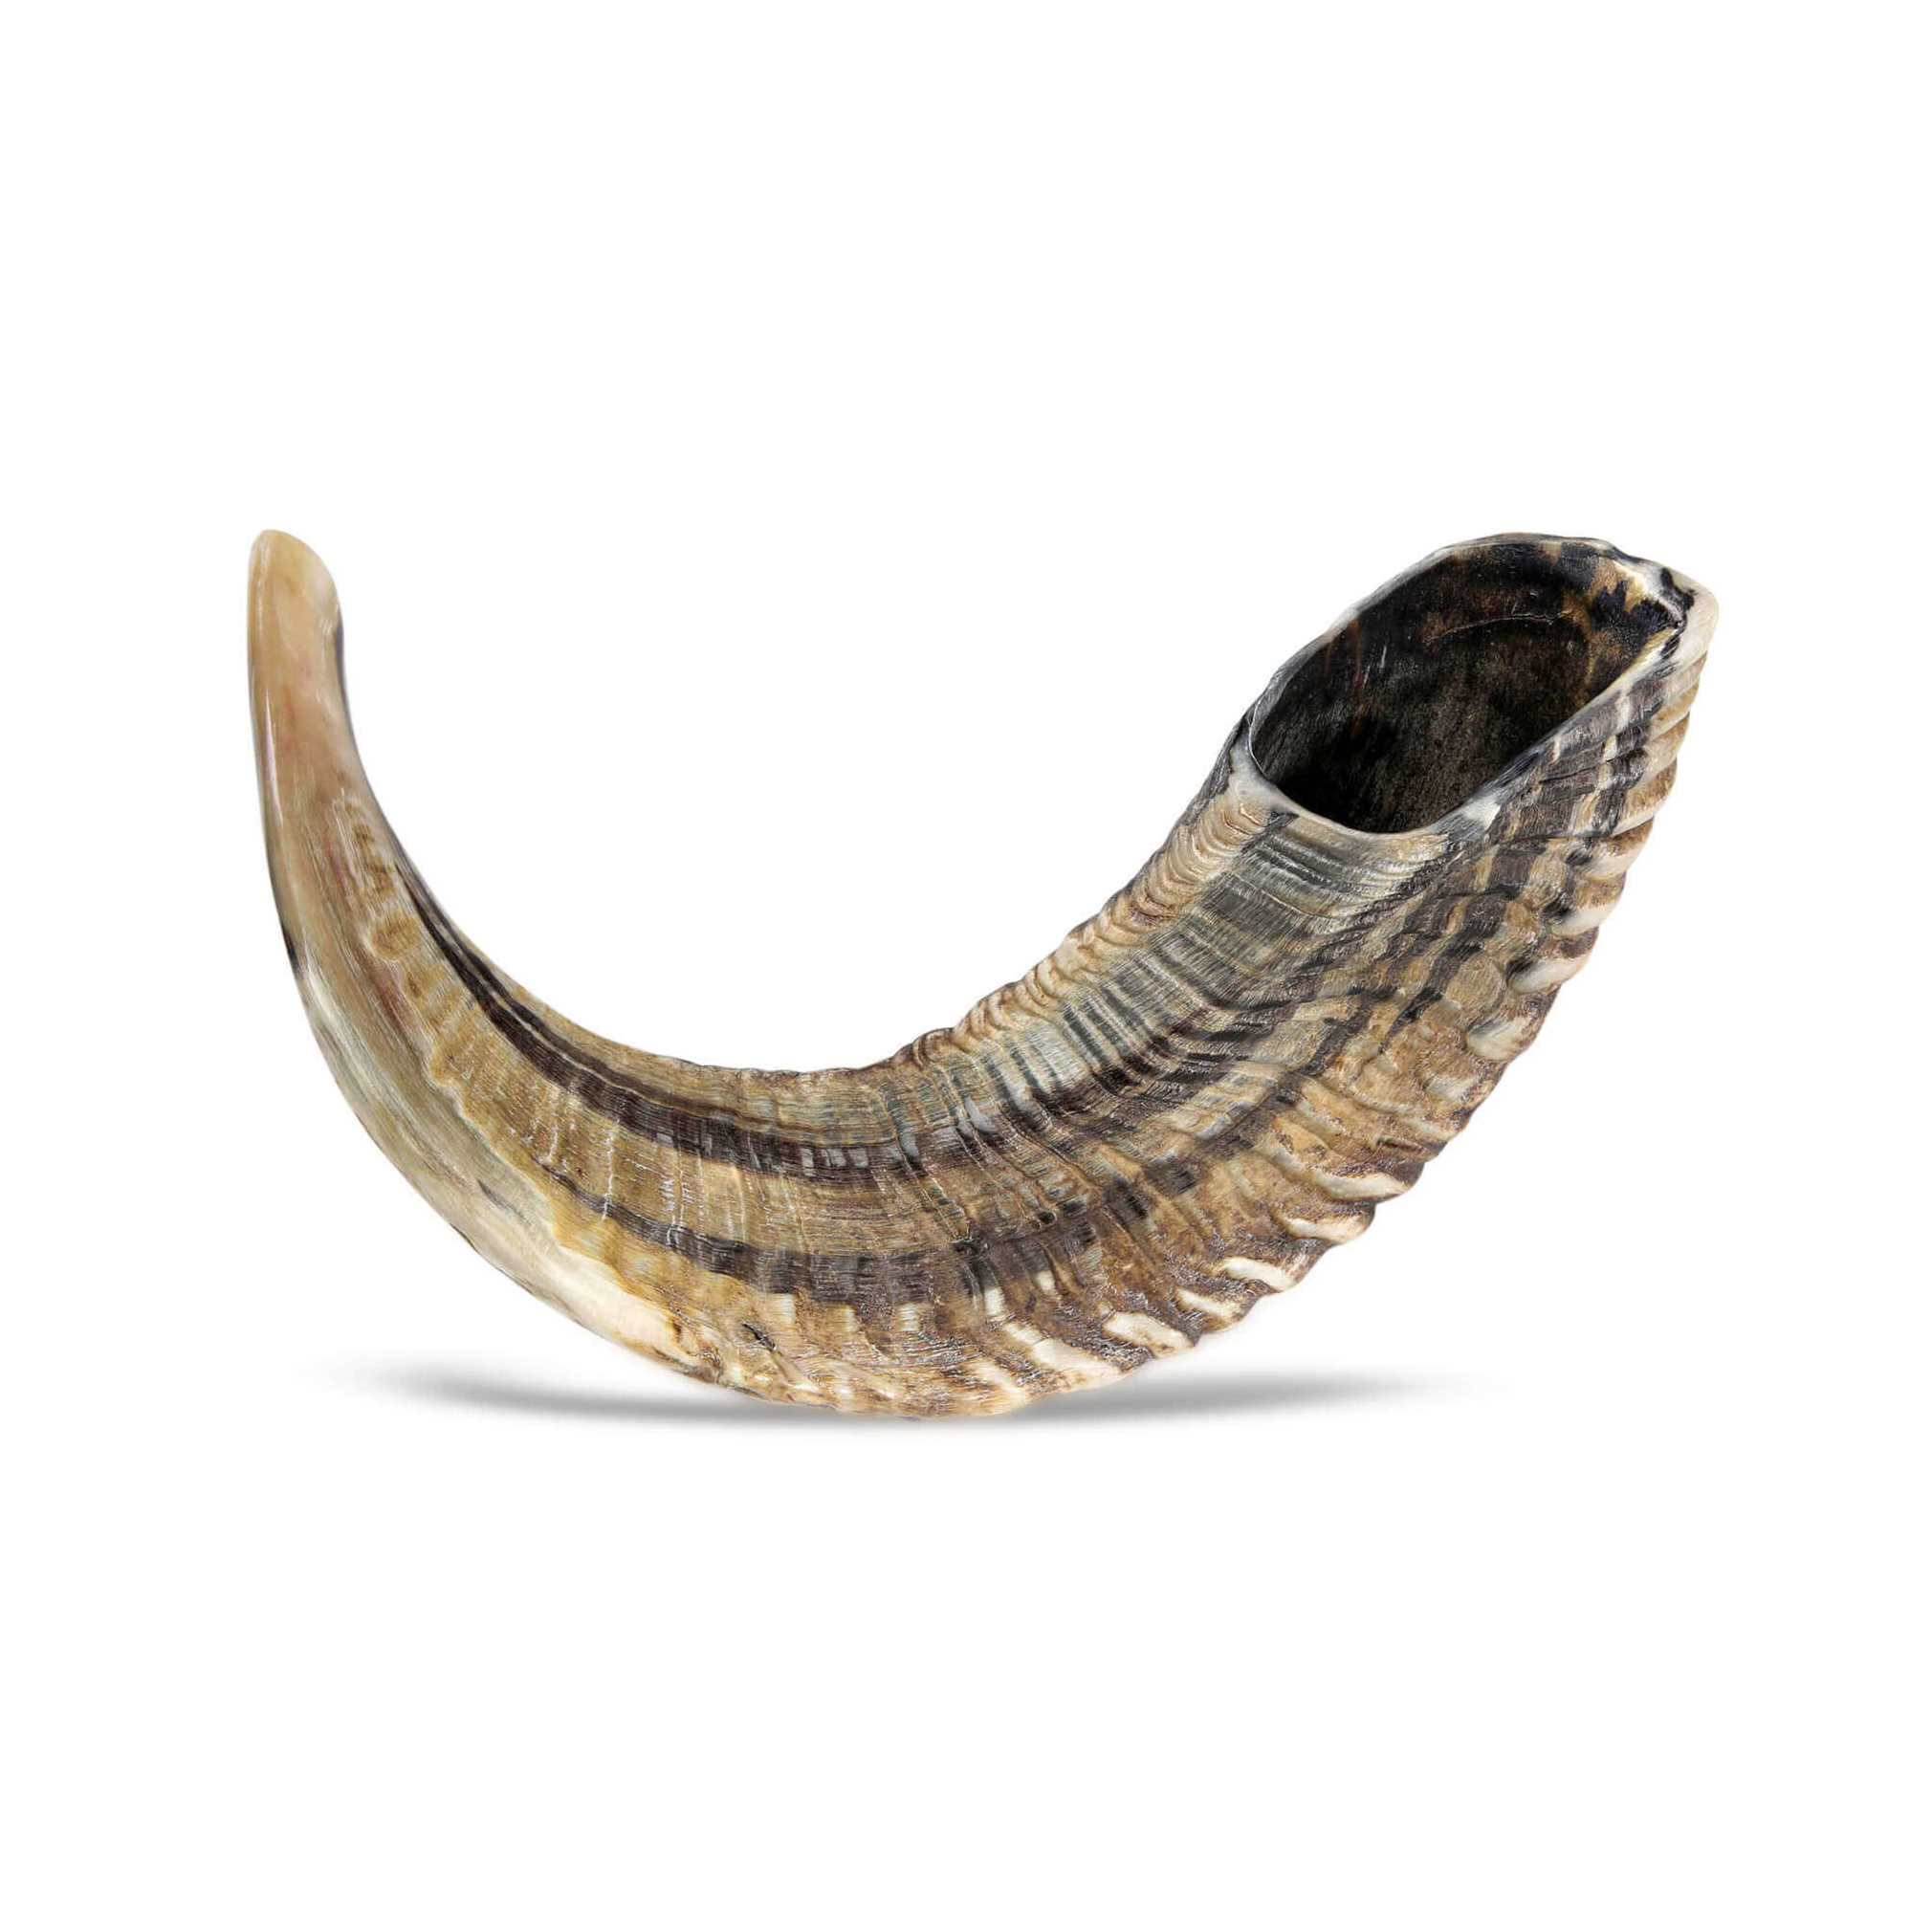 Polished Functional Jewish Gifts for Women & Men by Holy Voice 20-24 Decorative 16-42 Musical Horn Anti Odor Spray Handcrafted Kosher Kudu Shofar from Israel & Shofar Bag 